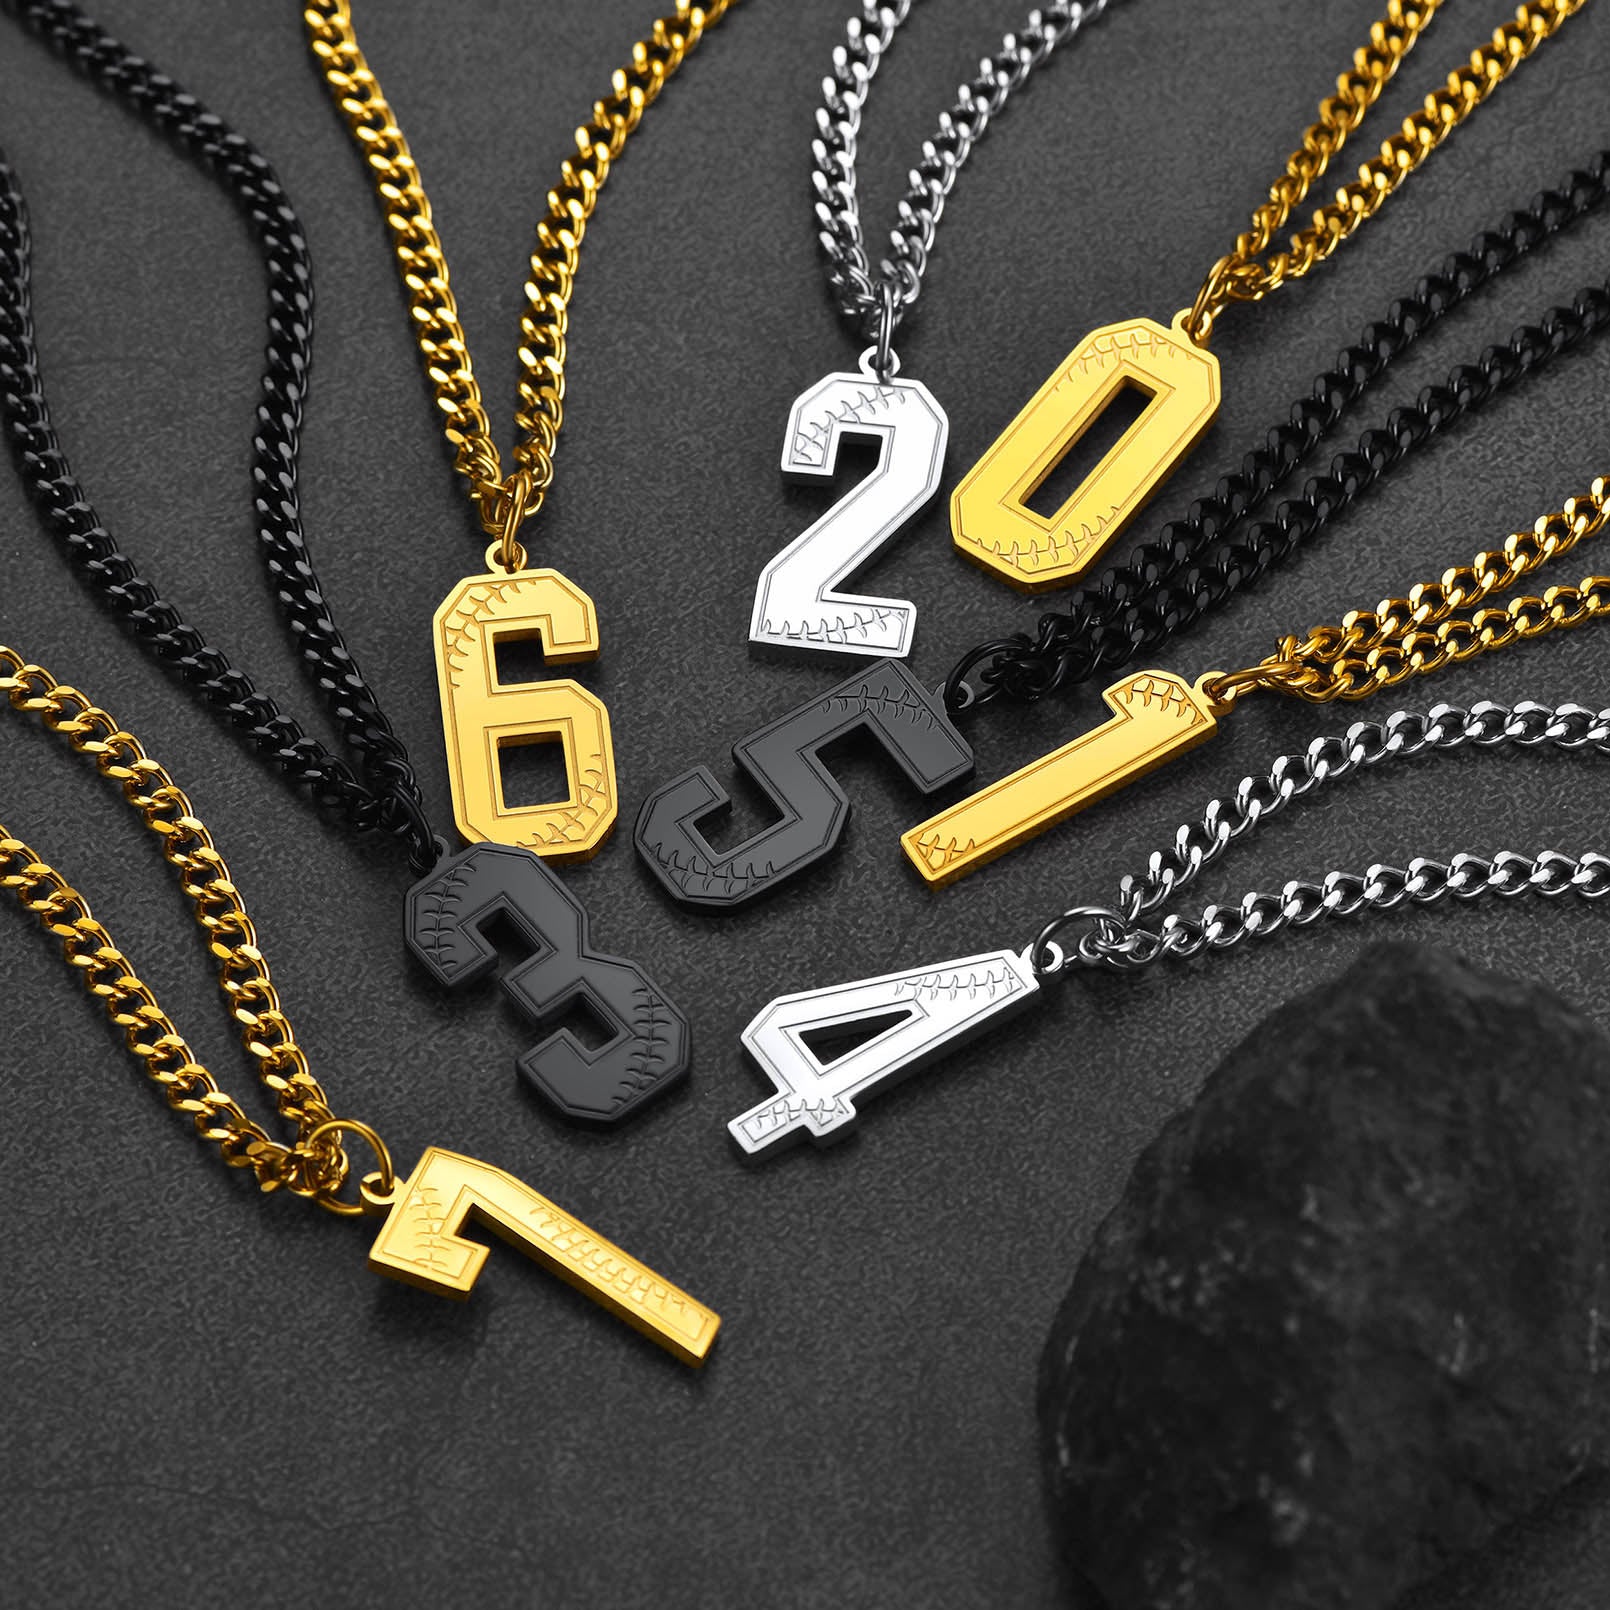 Inspiration Baseballs Number Necklace Chain for Sports Fan FaithHeart